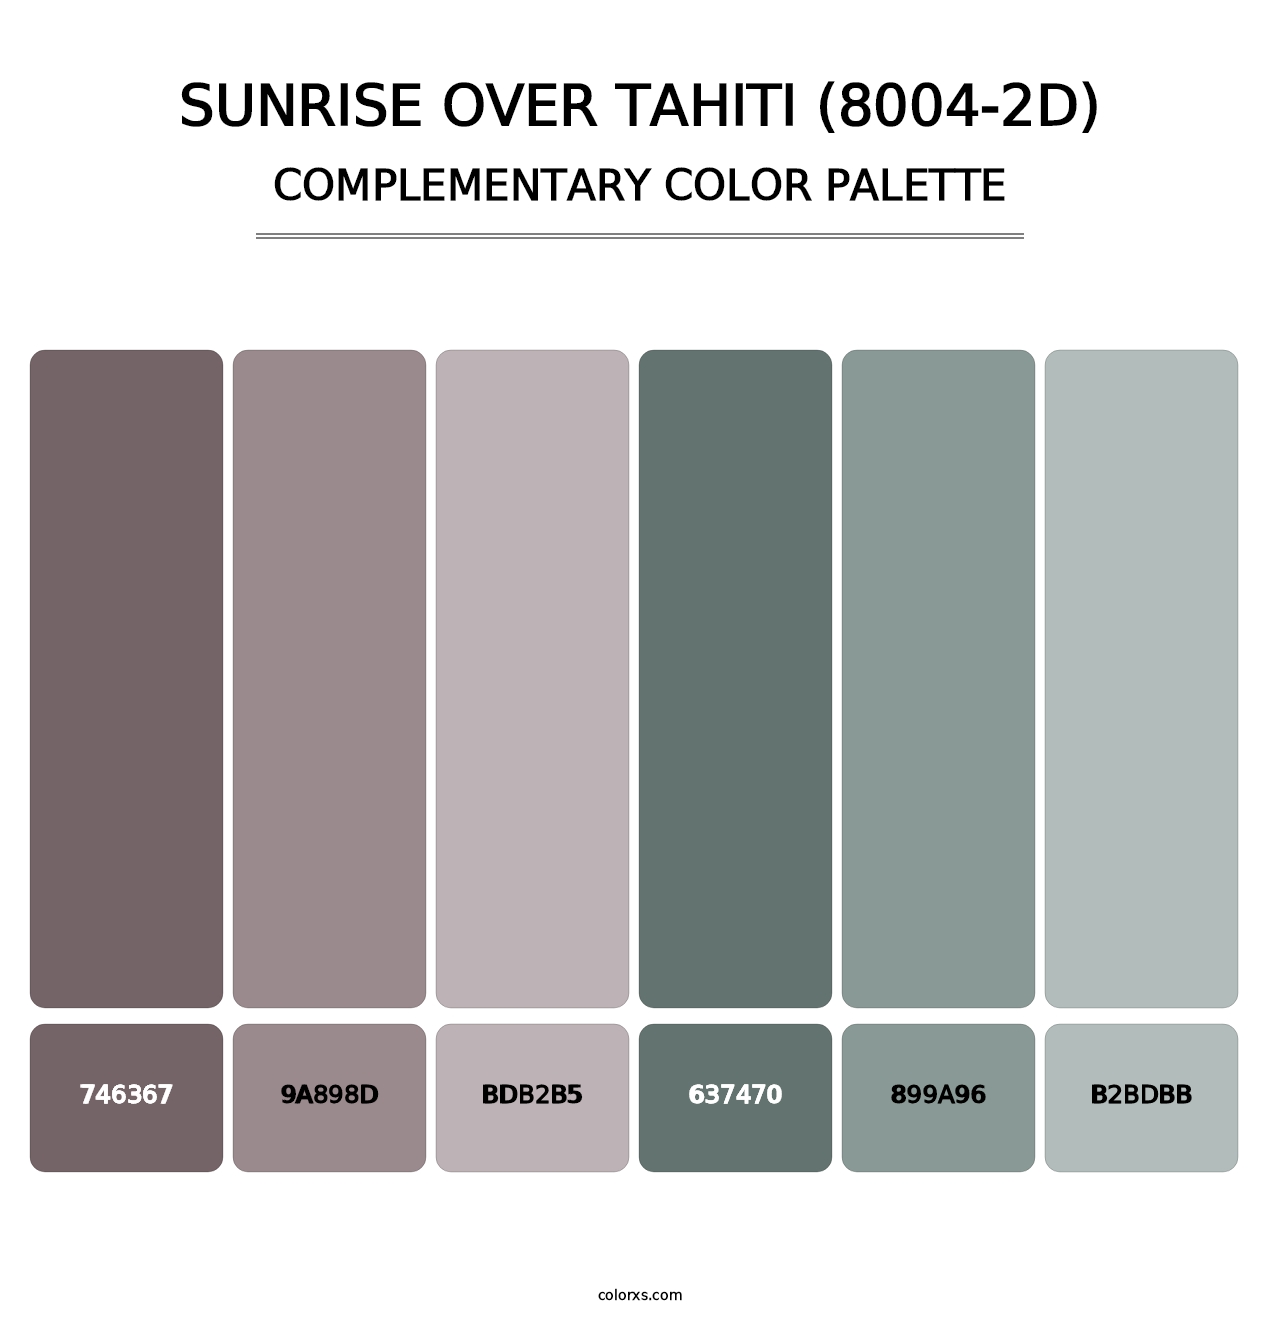 Sunrise Over Tahiti (8004-2D) - Complementary Color Palette